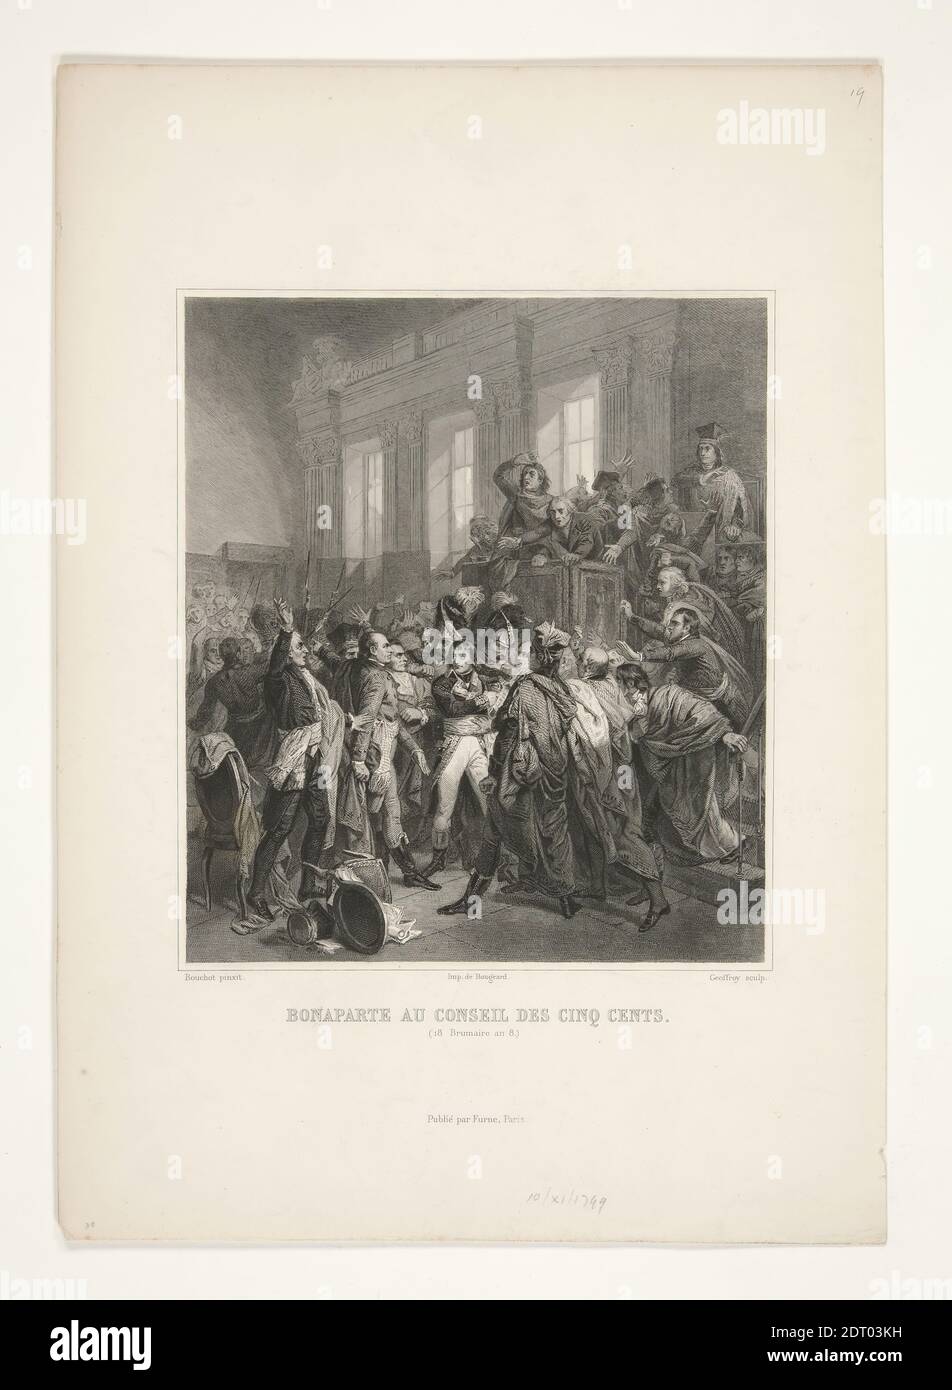 Engraver: Charles Michel Geoffroy, French, 1819–1880, After: François Bouchot, French, 1800–1842, Bonaparte au Conseil des Cinq Cents (Bonaparte at the Council of Five Hundred), Engraving, sheet: 22.5 × 30 cm (8 7/8 × 11 13/16 in.), French, 19th century, Works on Paper - Prints Stock Photo